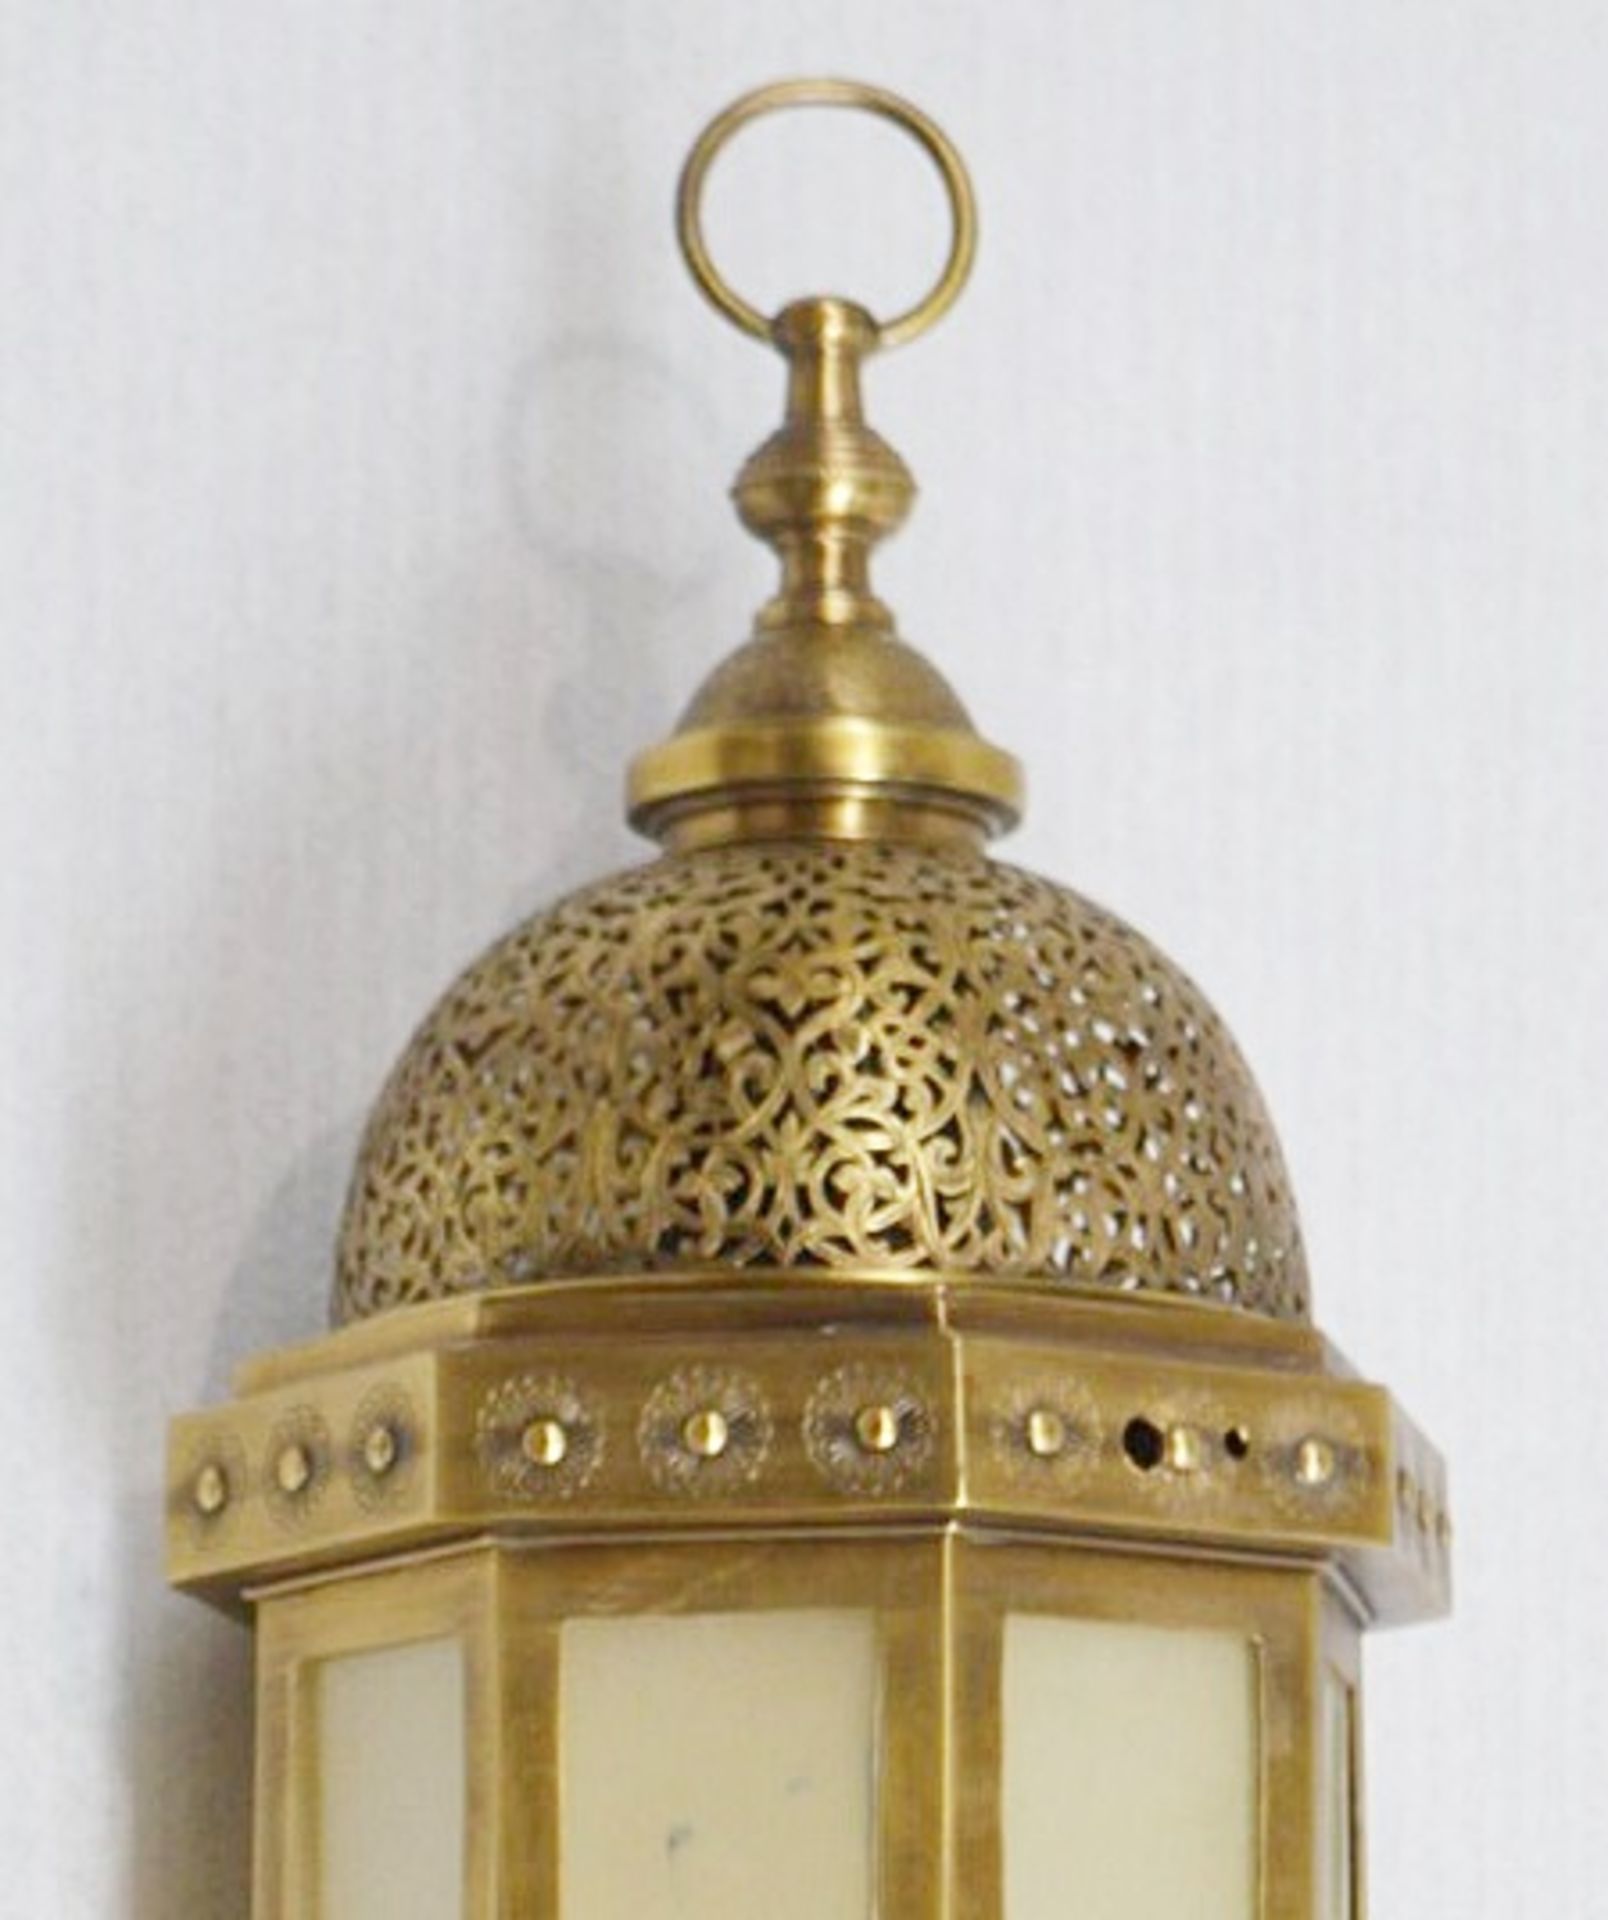 1 x Moroccan-style Brass Pendant Light Featuring Intricate Filigree Detailing - Dimensions: Height - Image 2 of 7